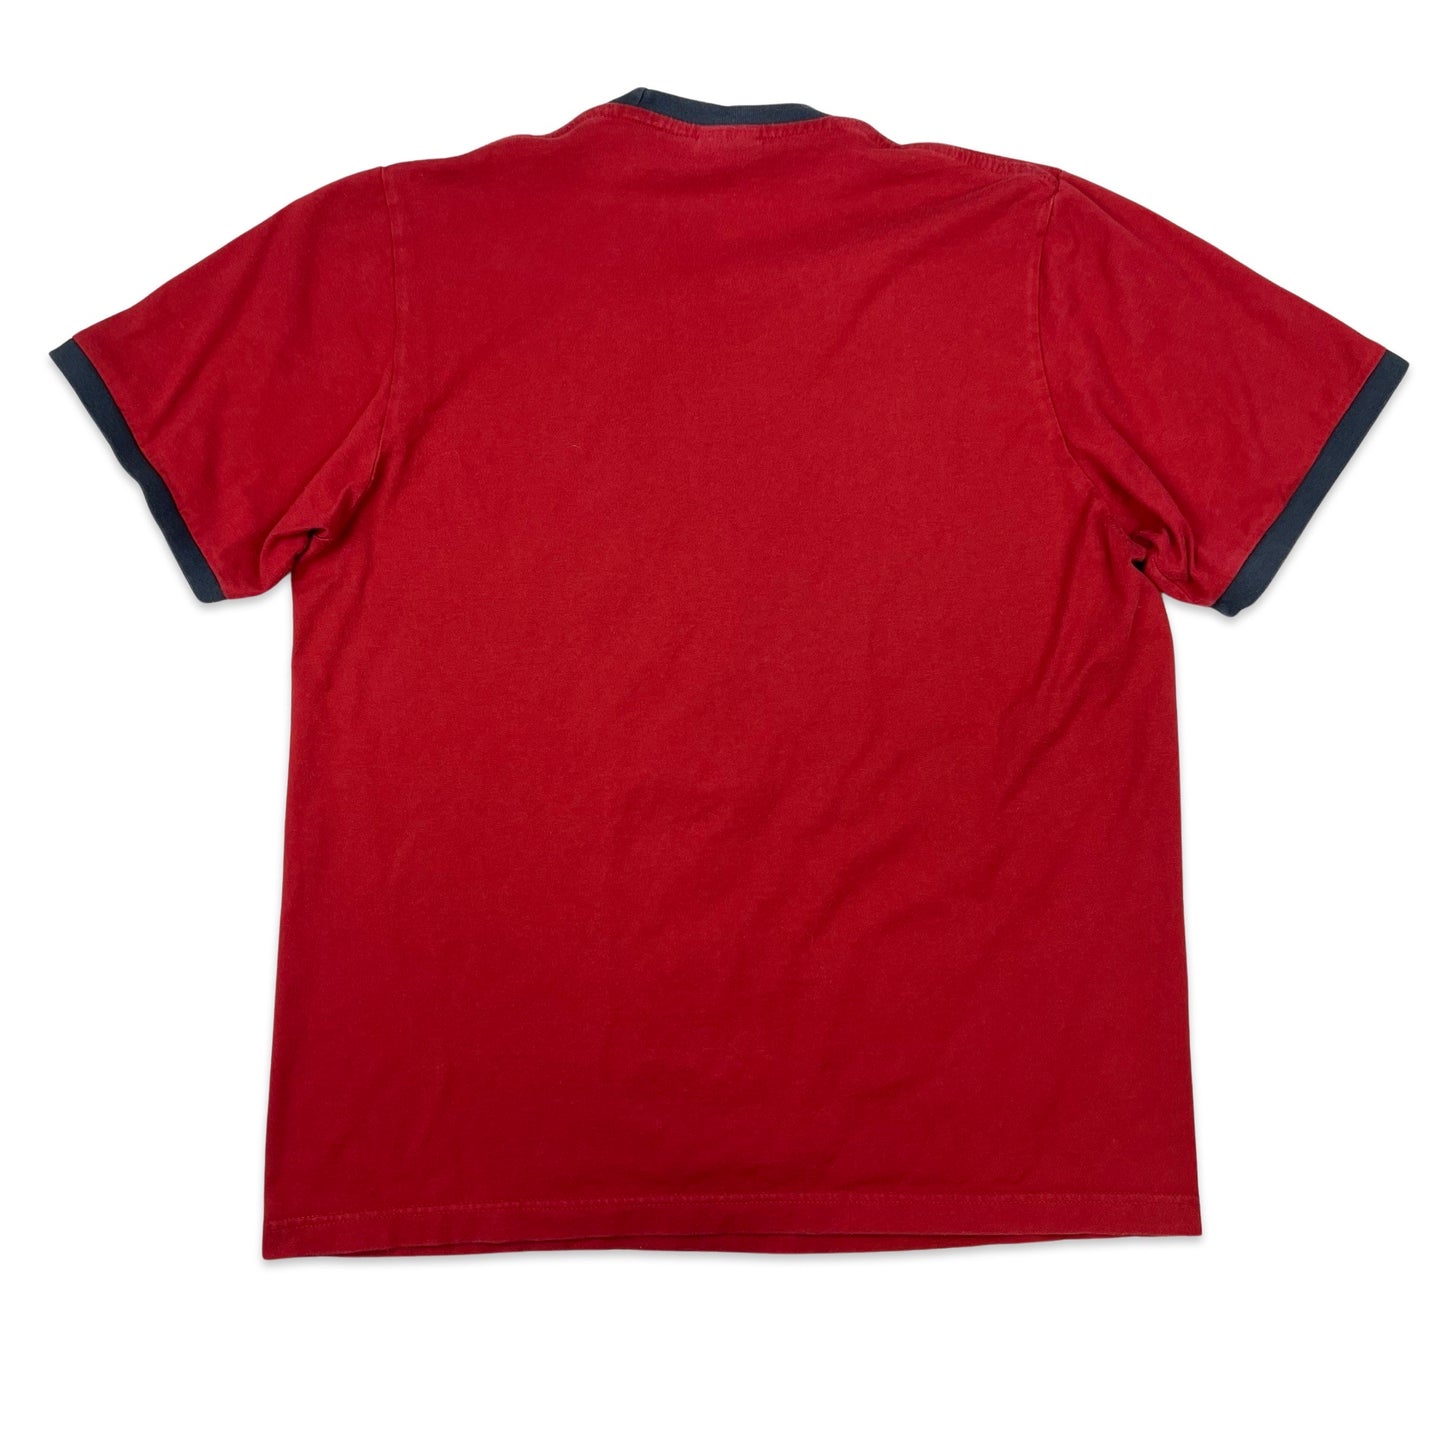 Adidas Red & Navy Graphic Print Ringer Tee S M